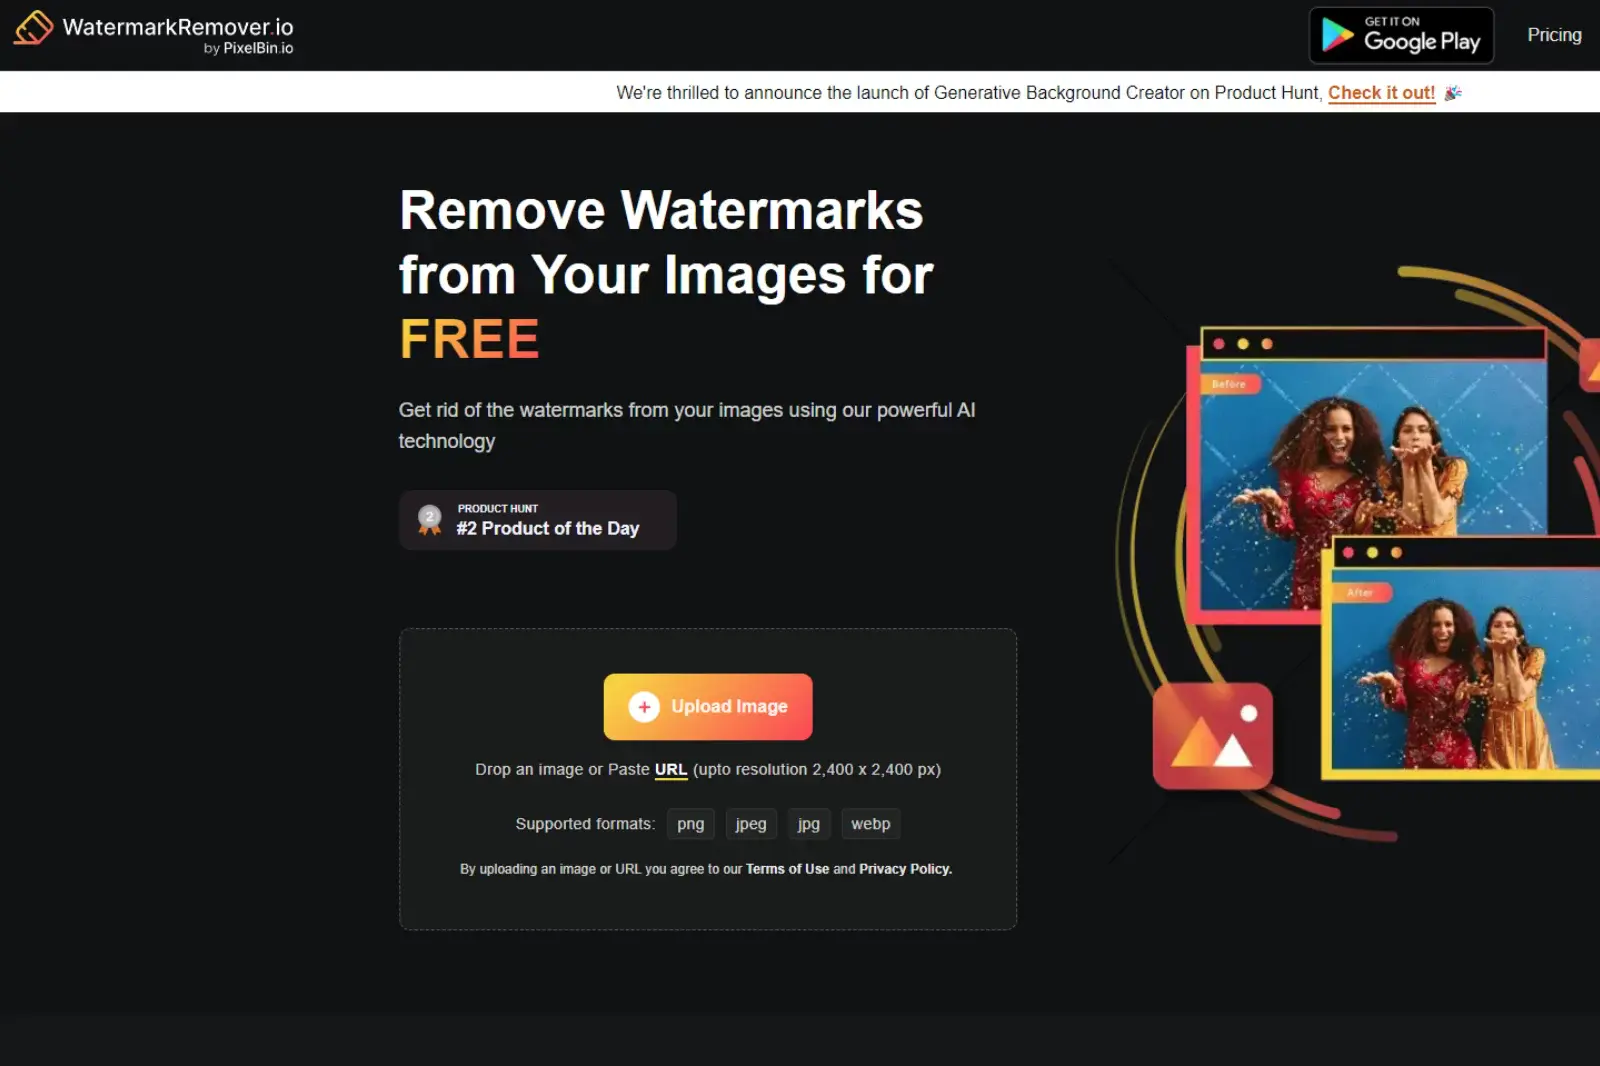 Home Page of WatermarkRemover.io